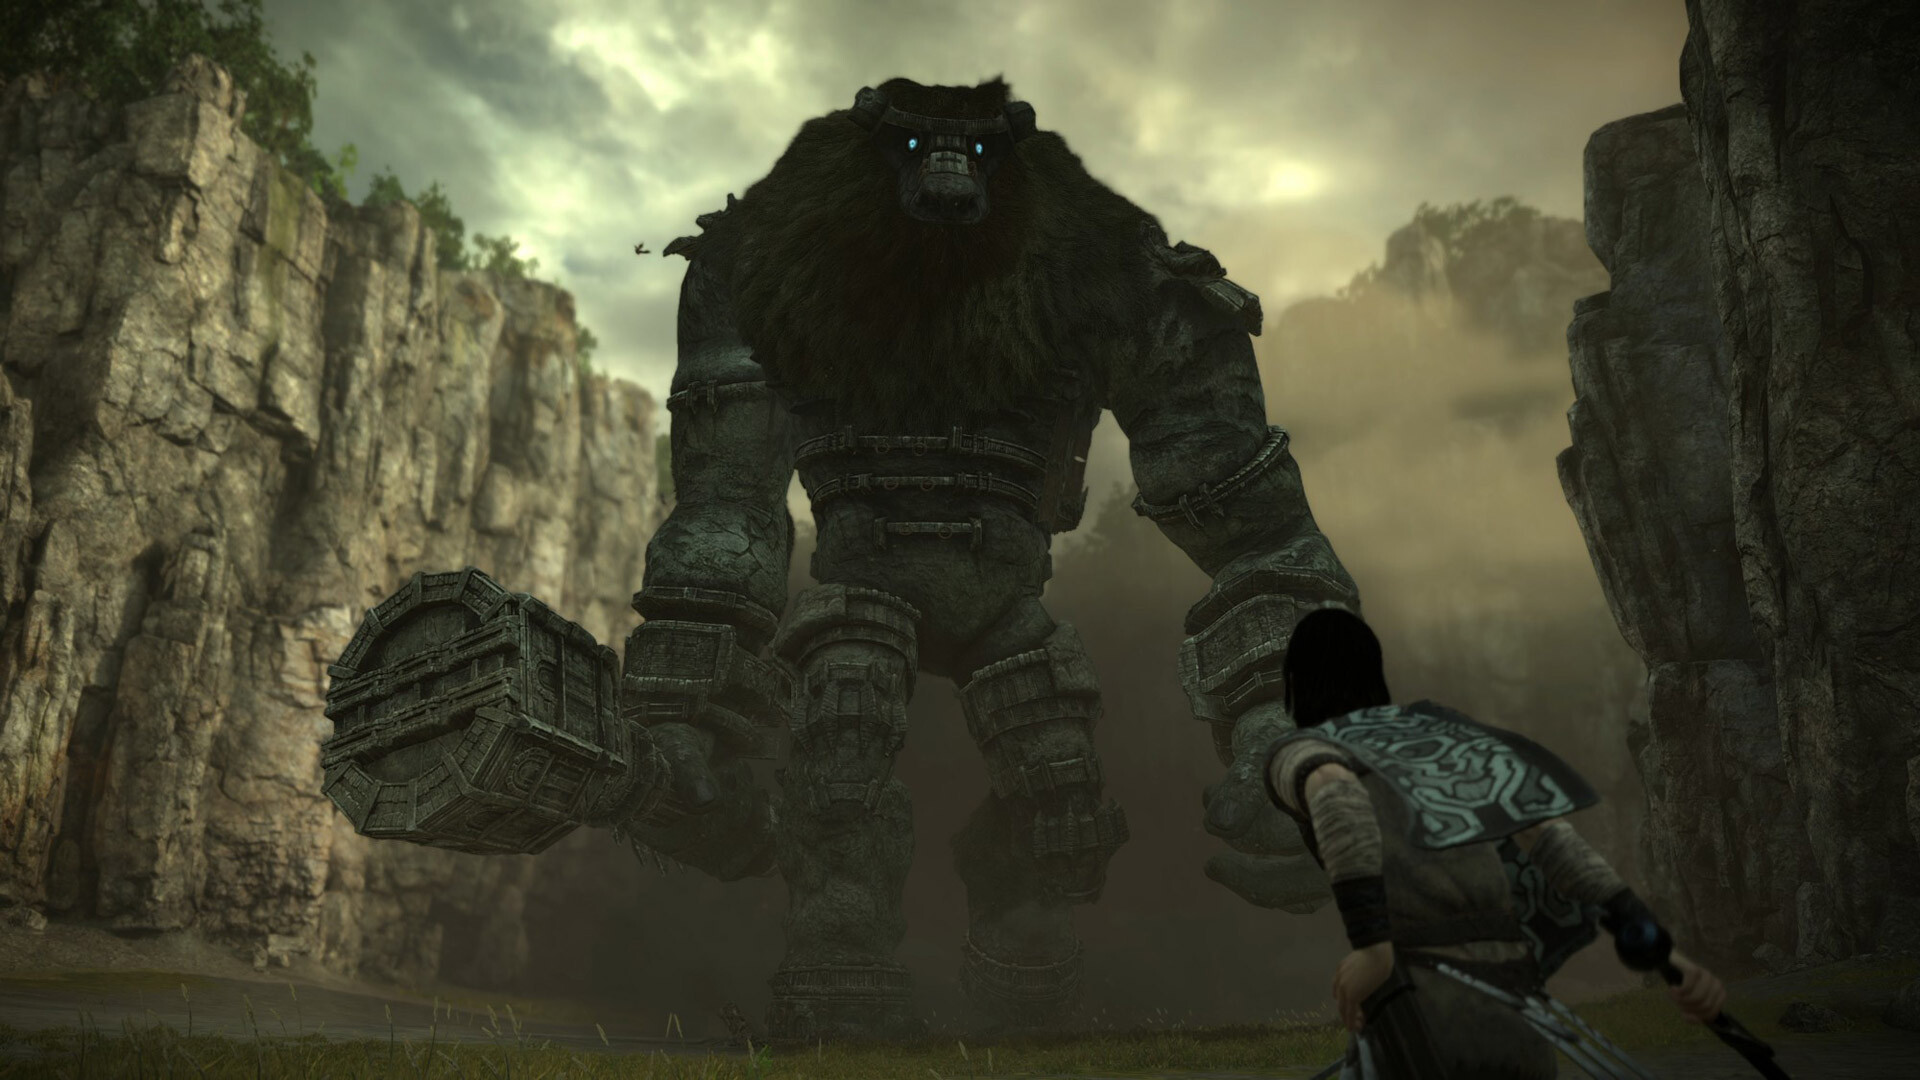 Shadow of the Colossus: Won Best Adventure Game at IGN's Best of 2005. 1920x1080 Full HD Wallpaper.